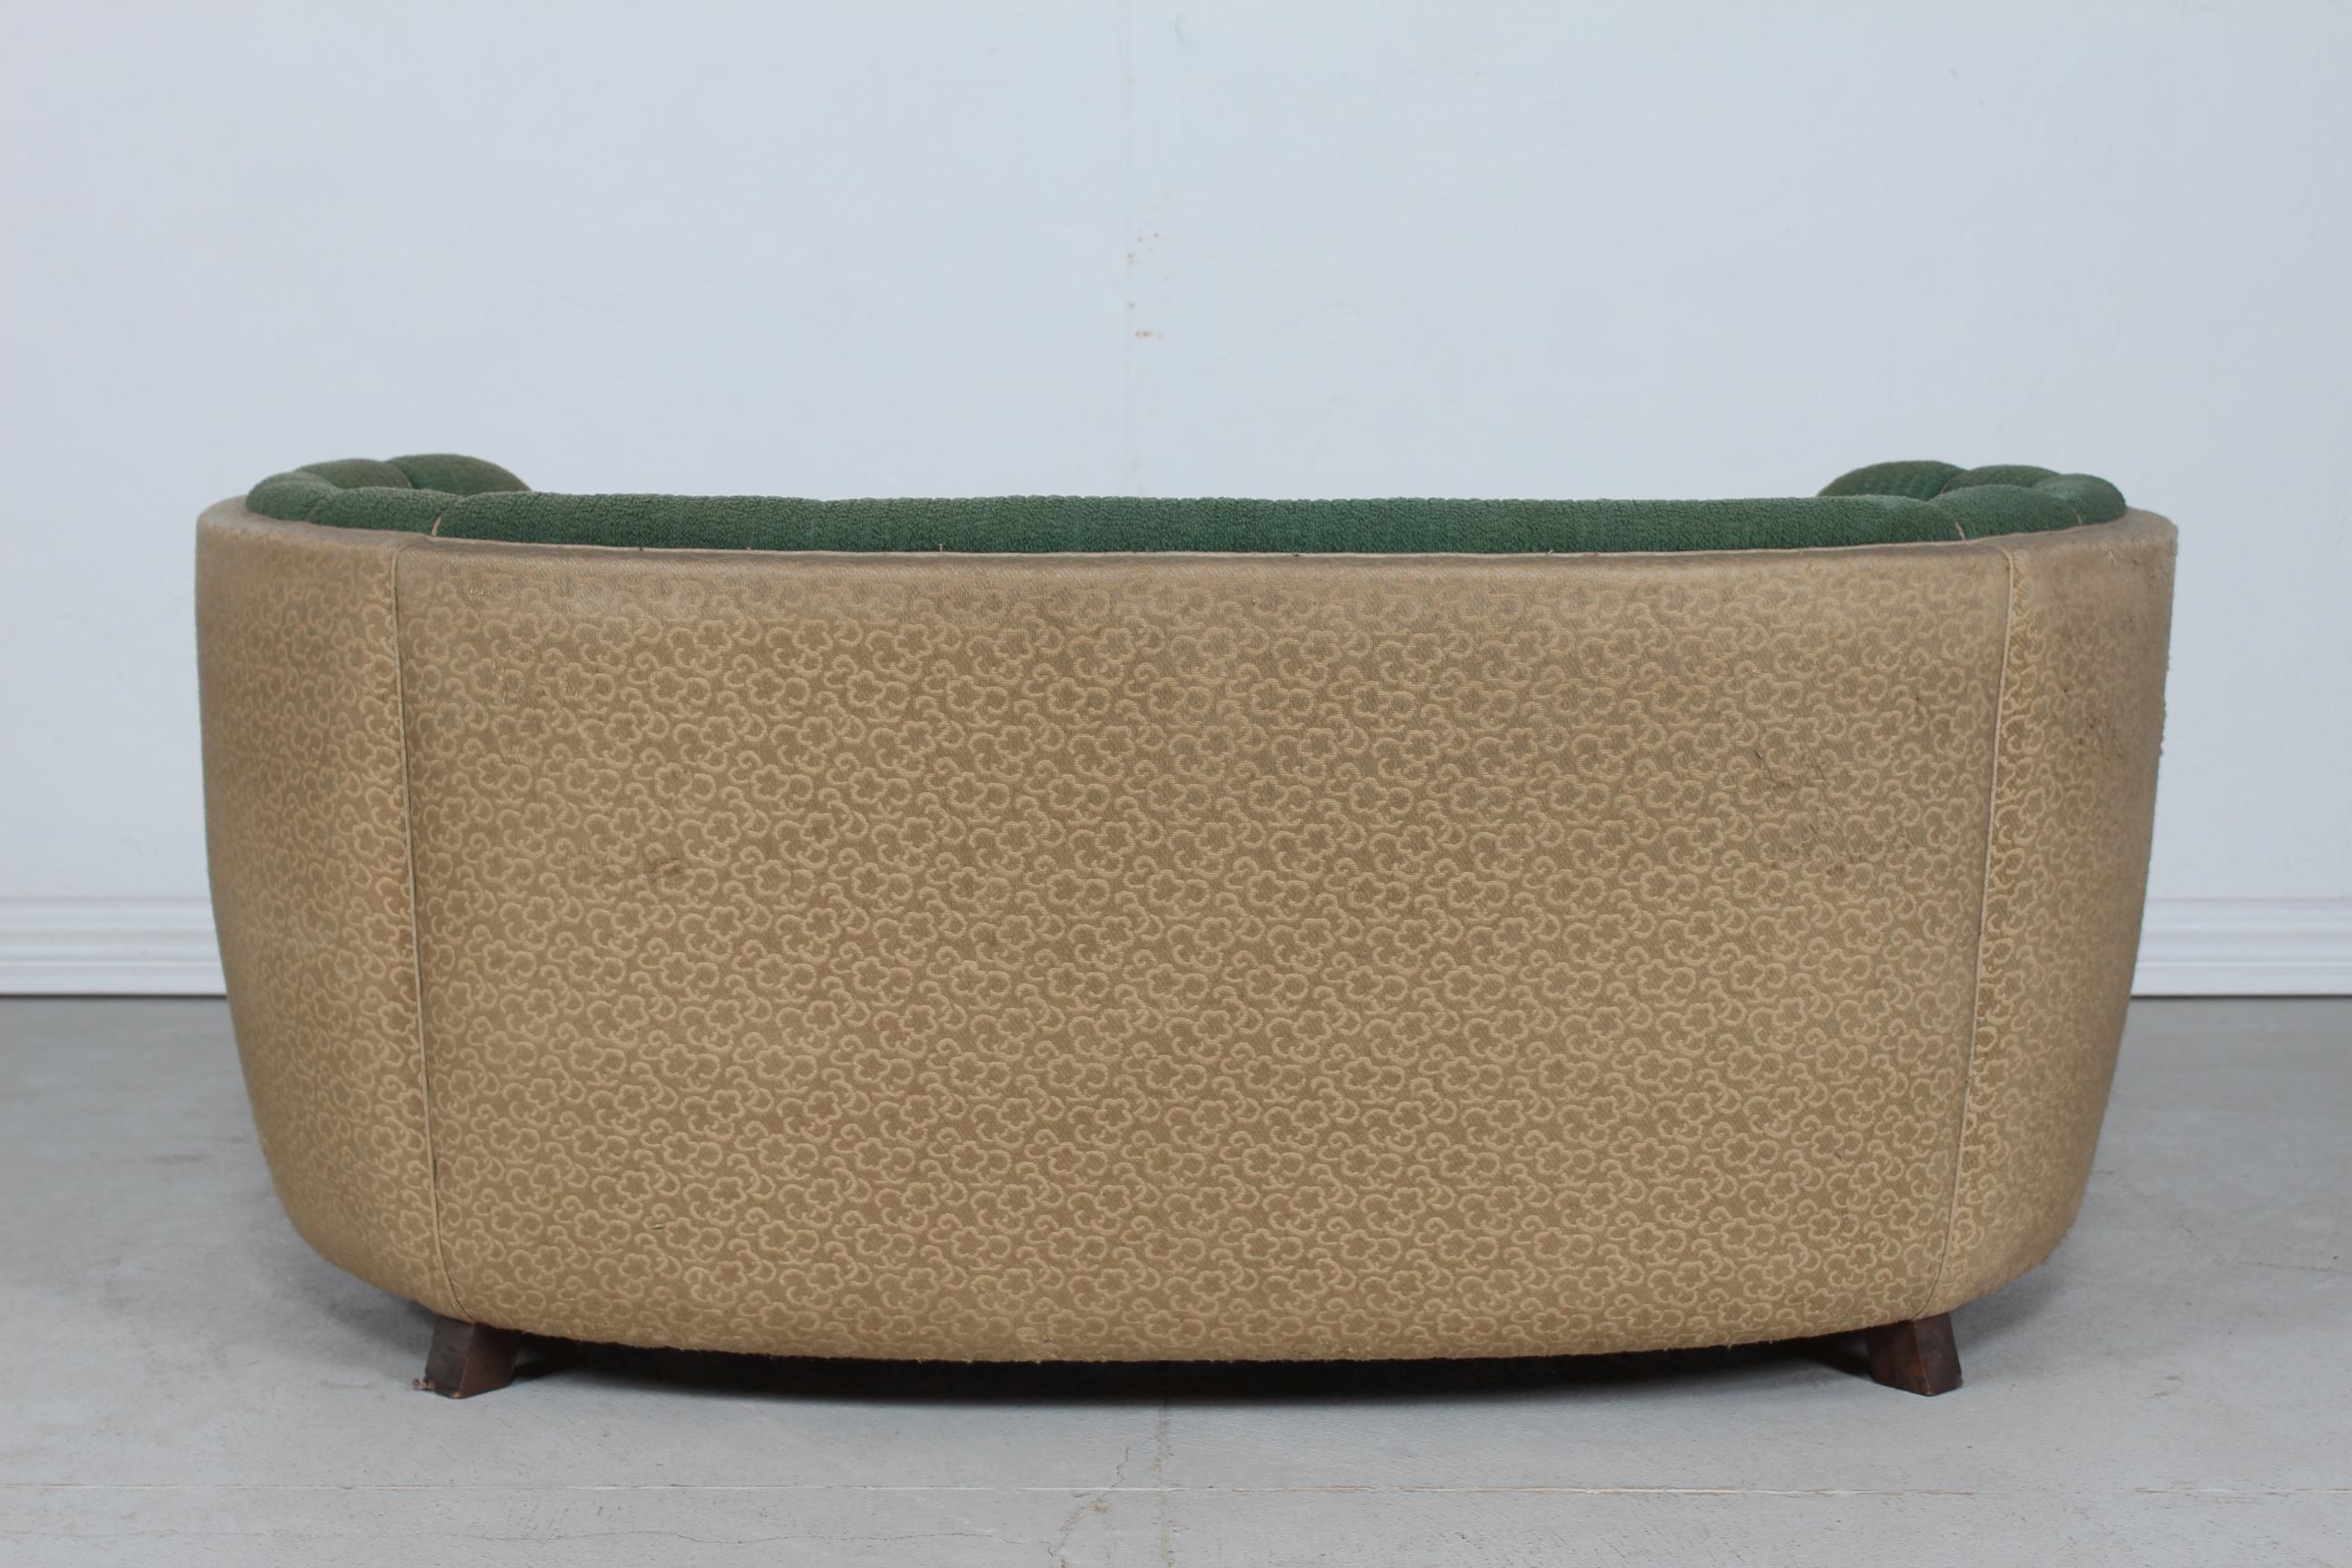 Danish Art Deco Curved Sofa Couch 1930s for Reupholstery For Sale 2